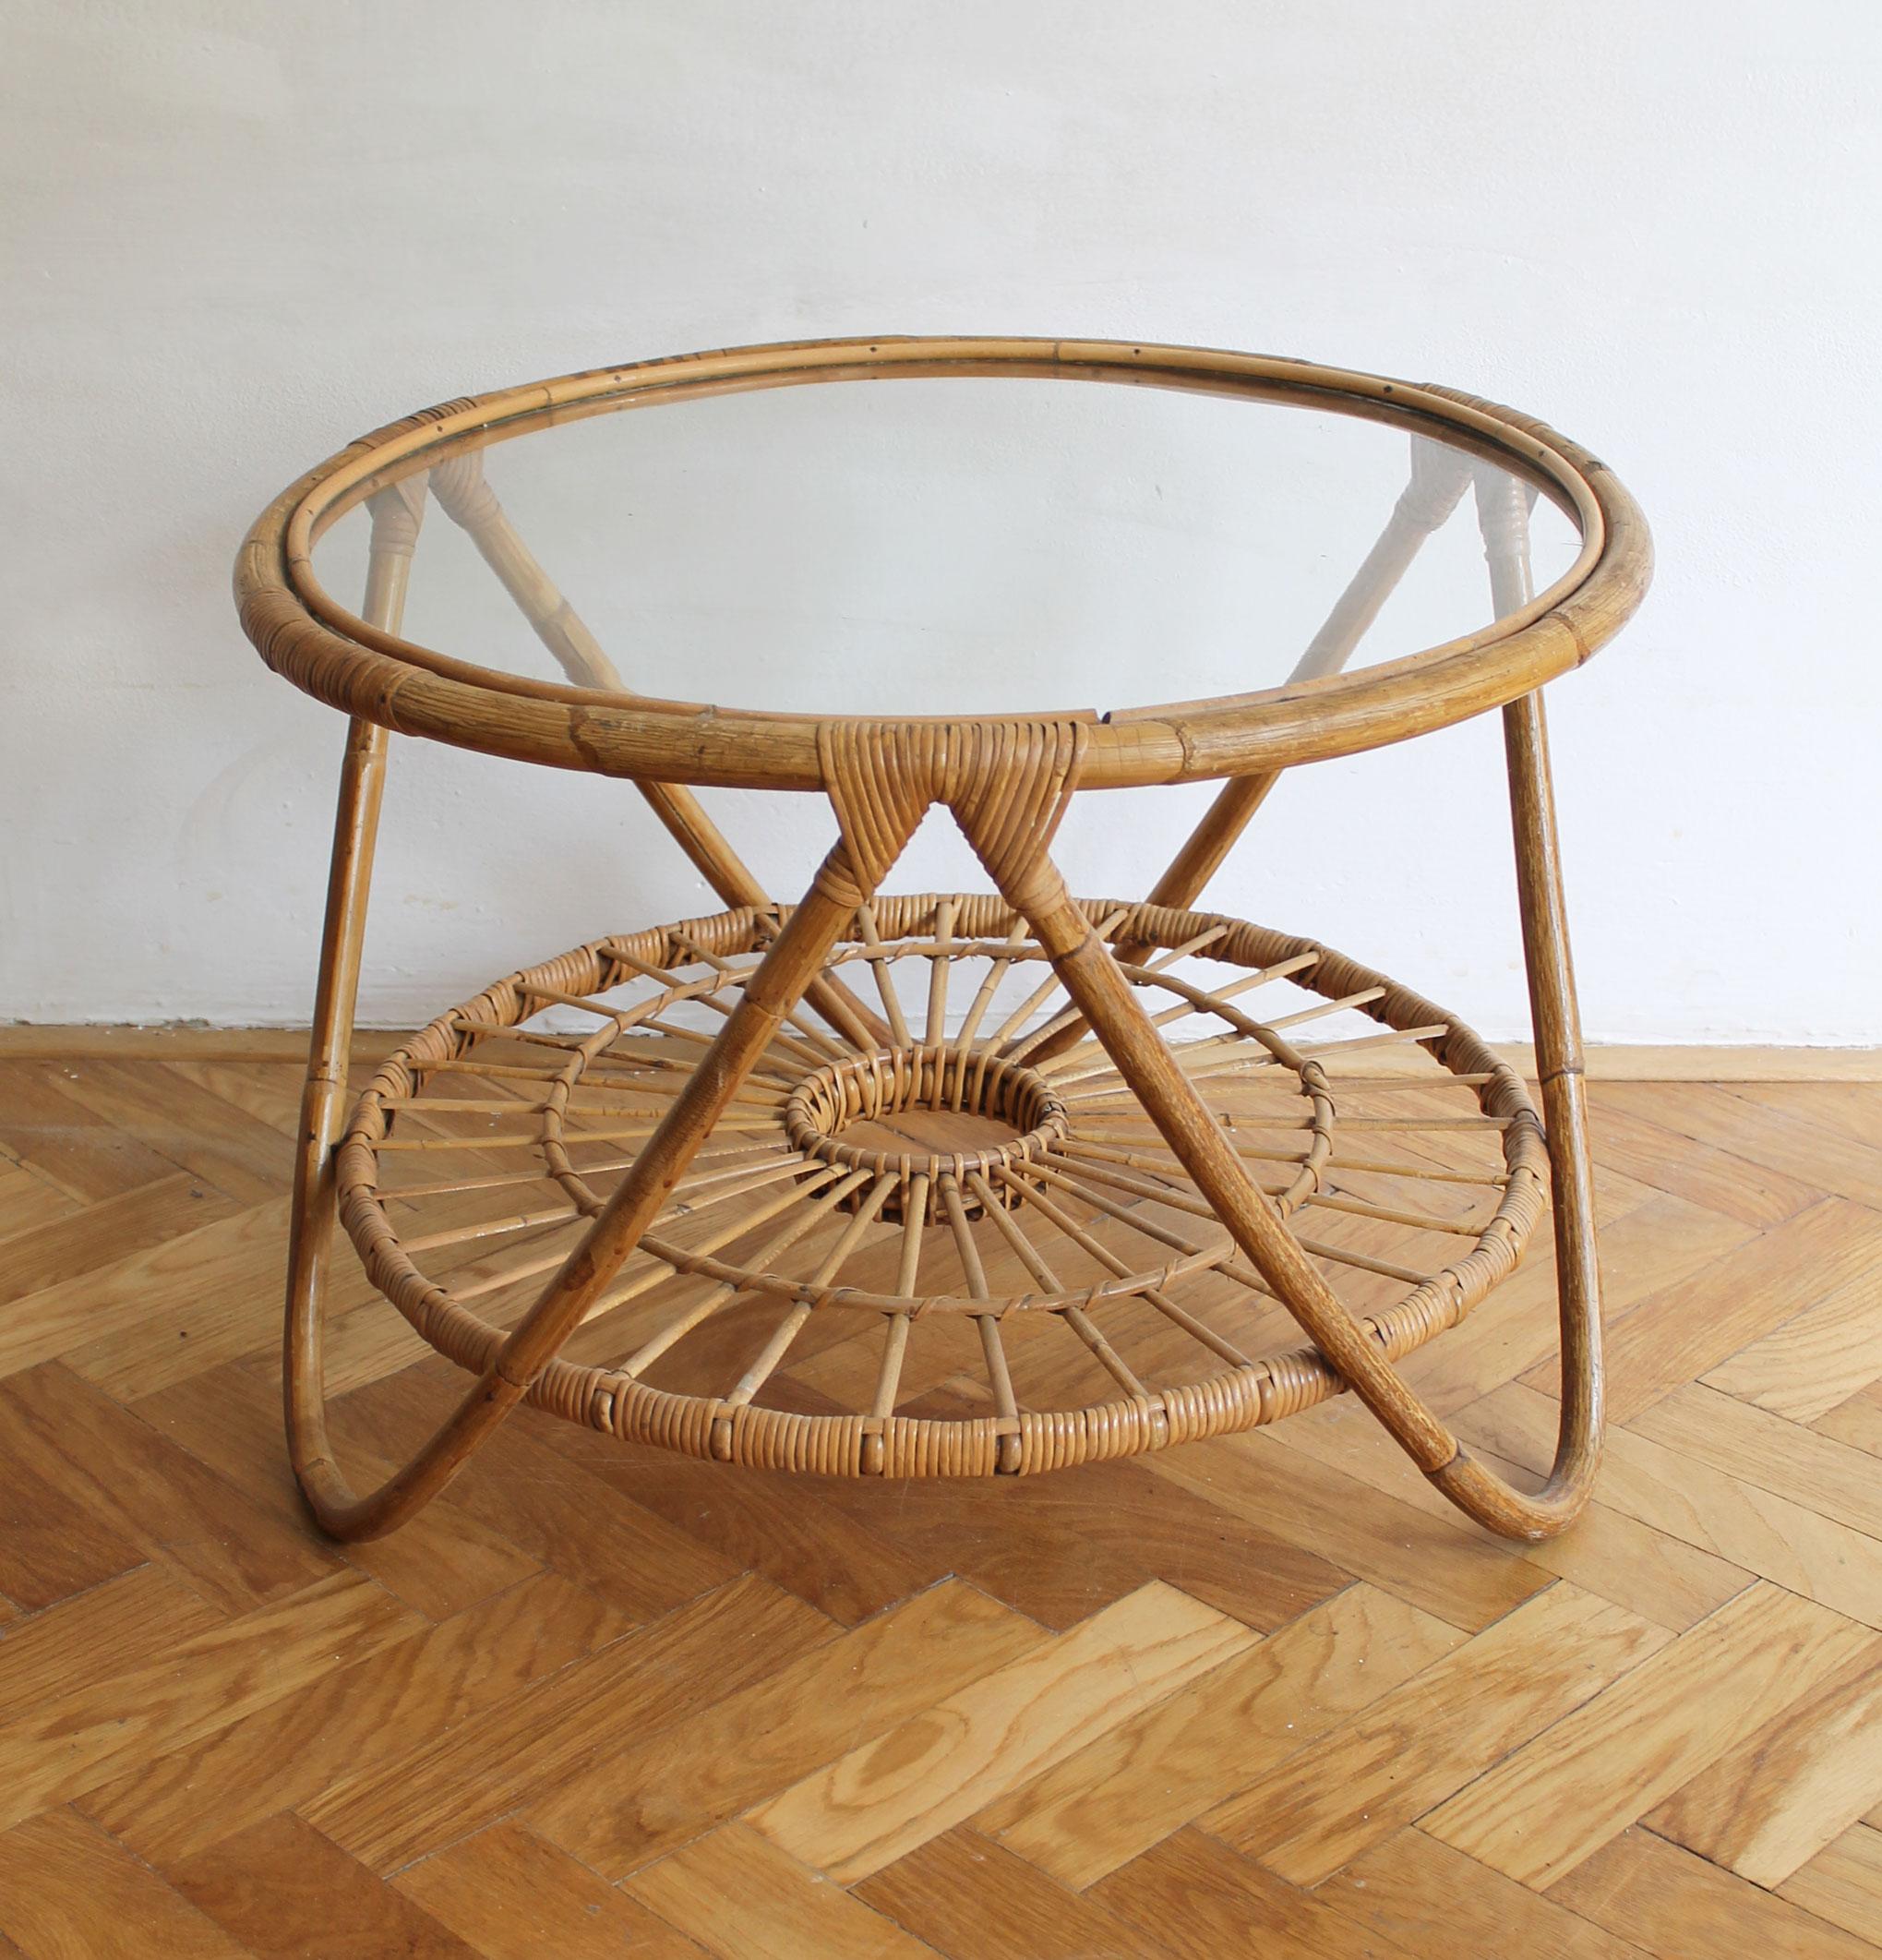 This is an original rattan set of furniture from the 1960’s. There is no producer label attached on any piece of this set and so it is unknown to us who designed and produced this set. However this design is very similar to work of two Czech